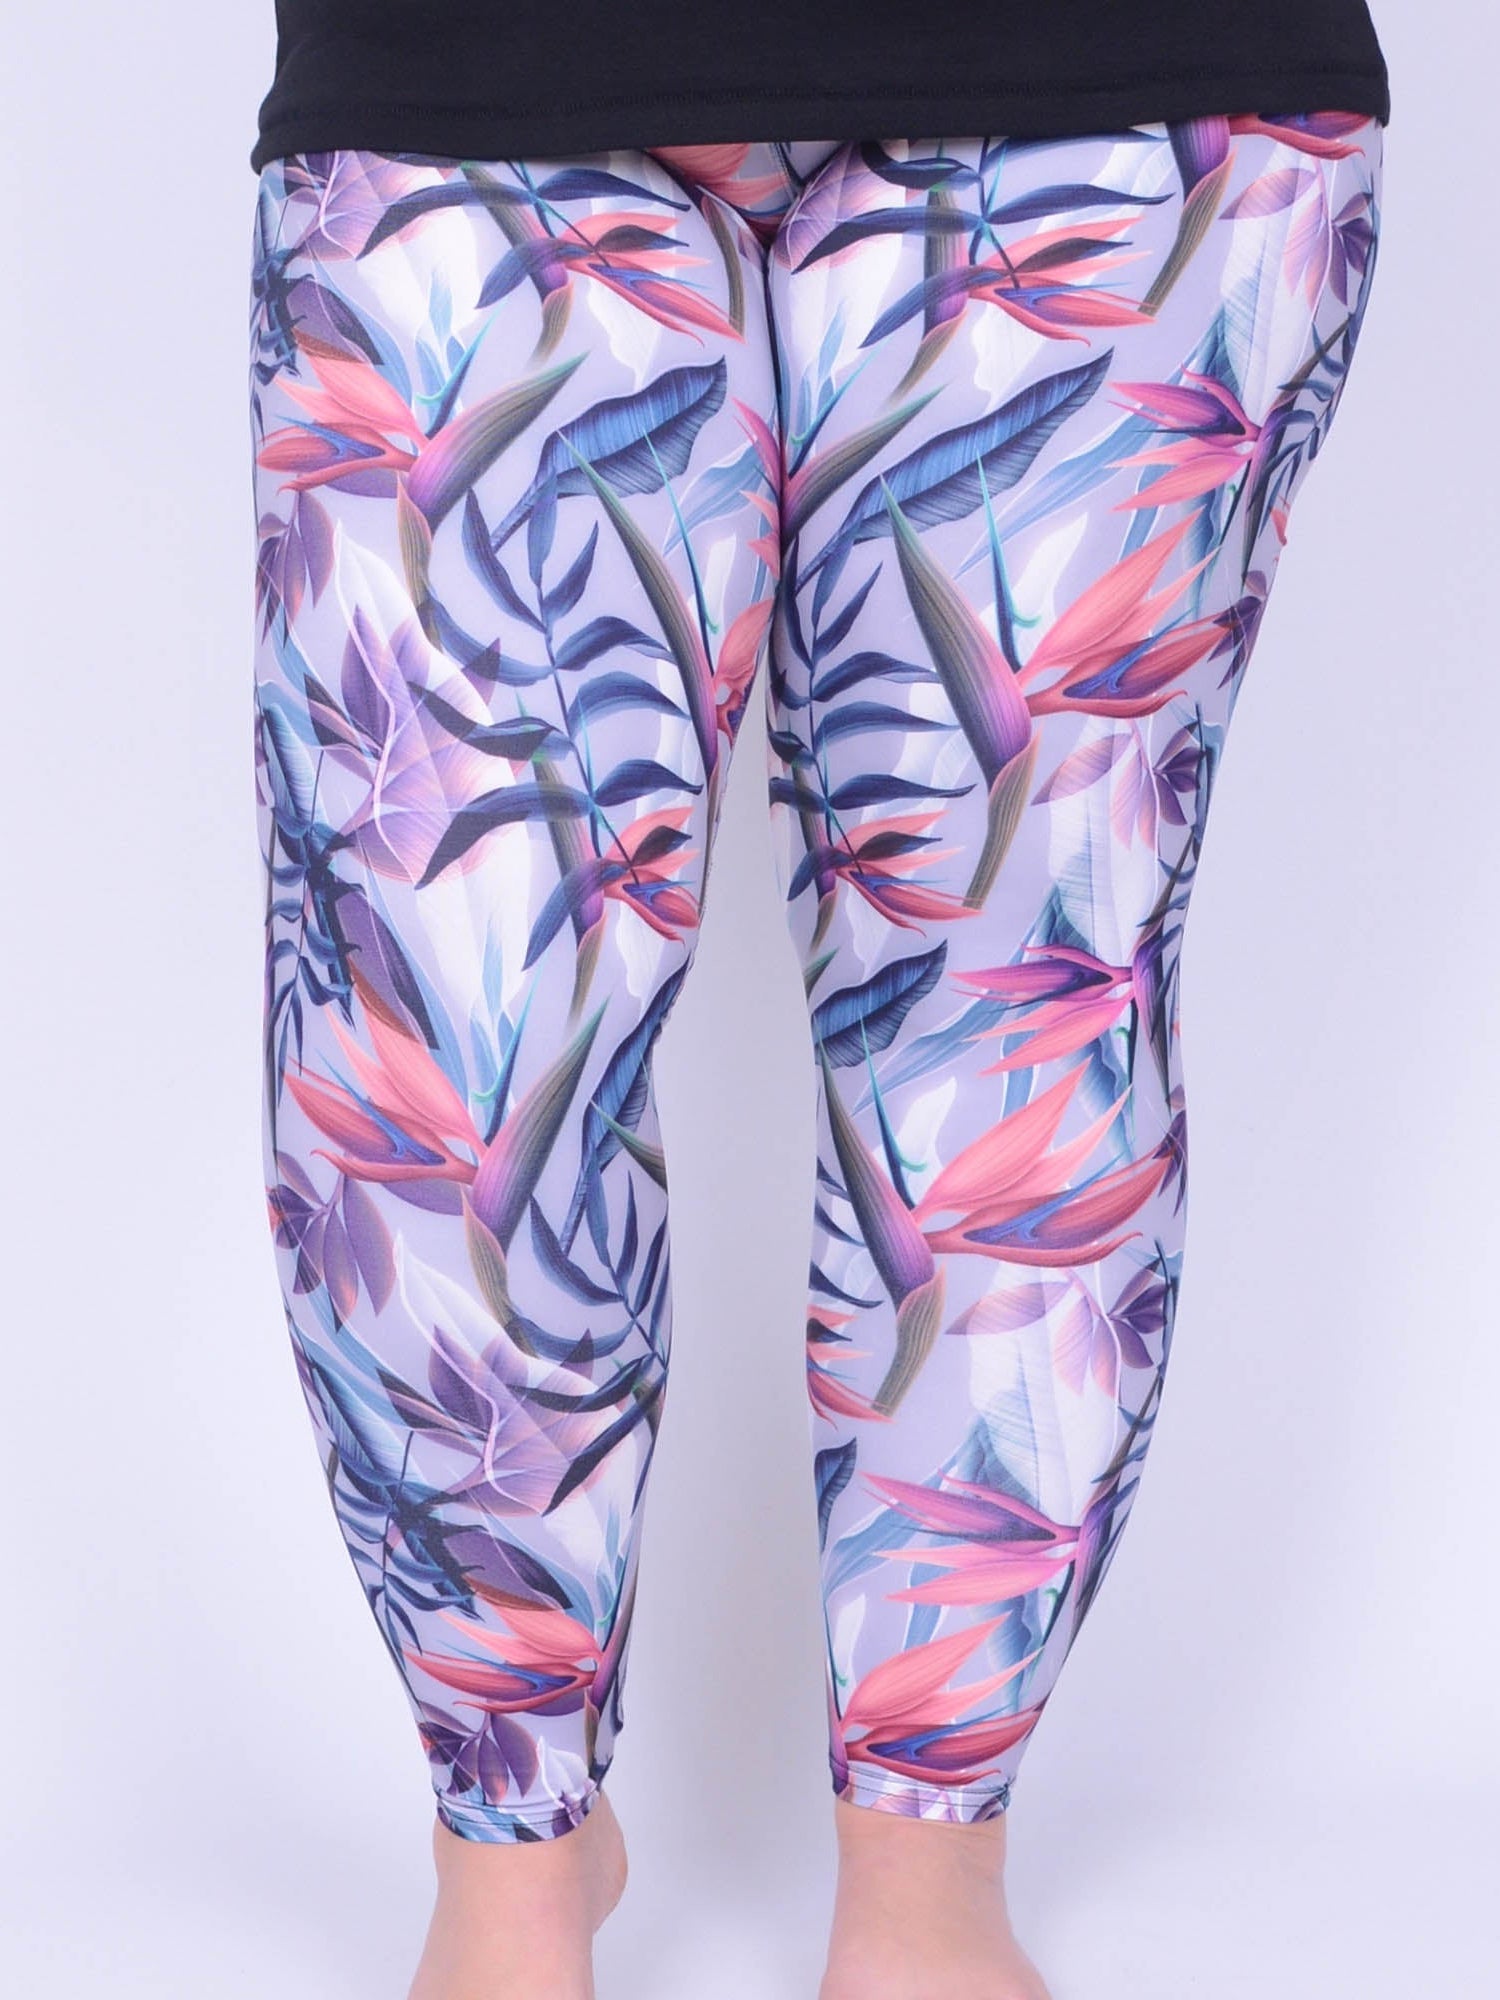 Leggings - Tropical Grey - L32, Trousers, Pure Plus Clothing, Lagenlook Clothing, Plus Size Fashion, Over 50 Fashion